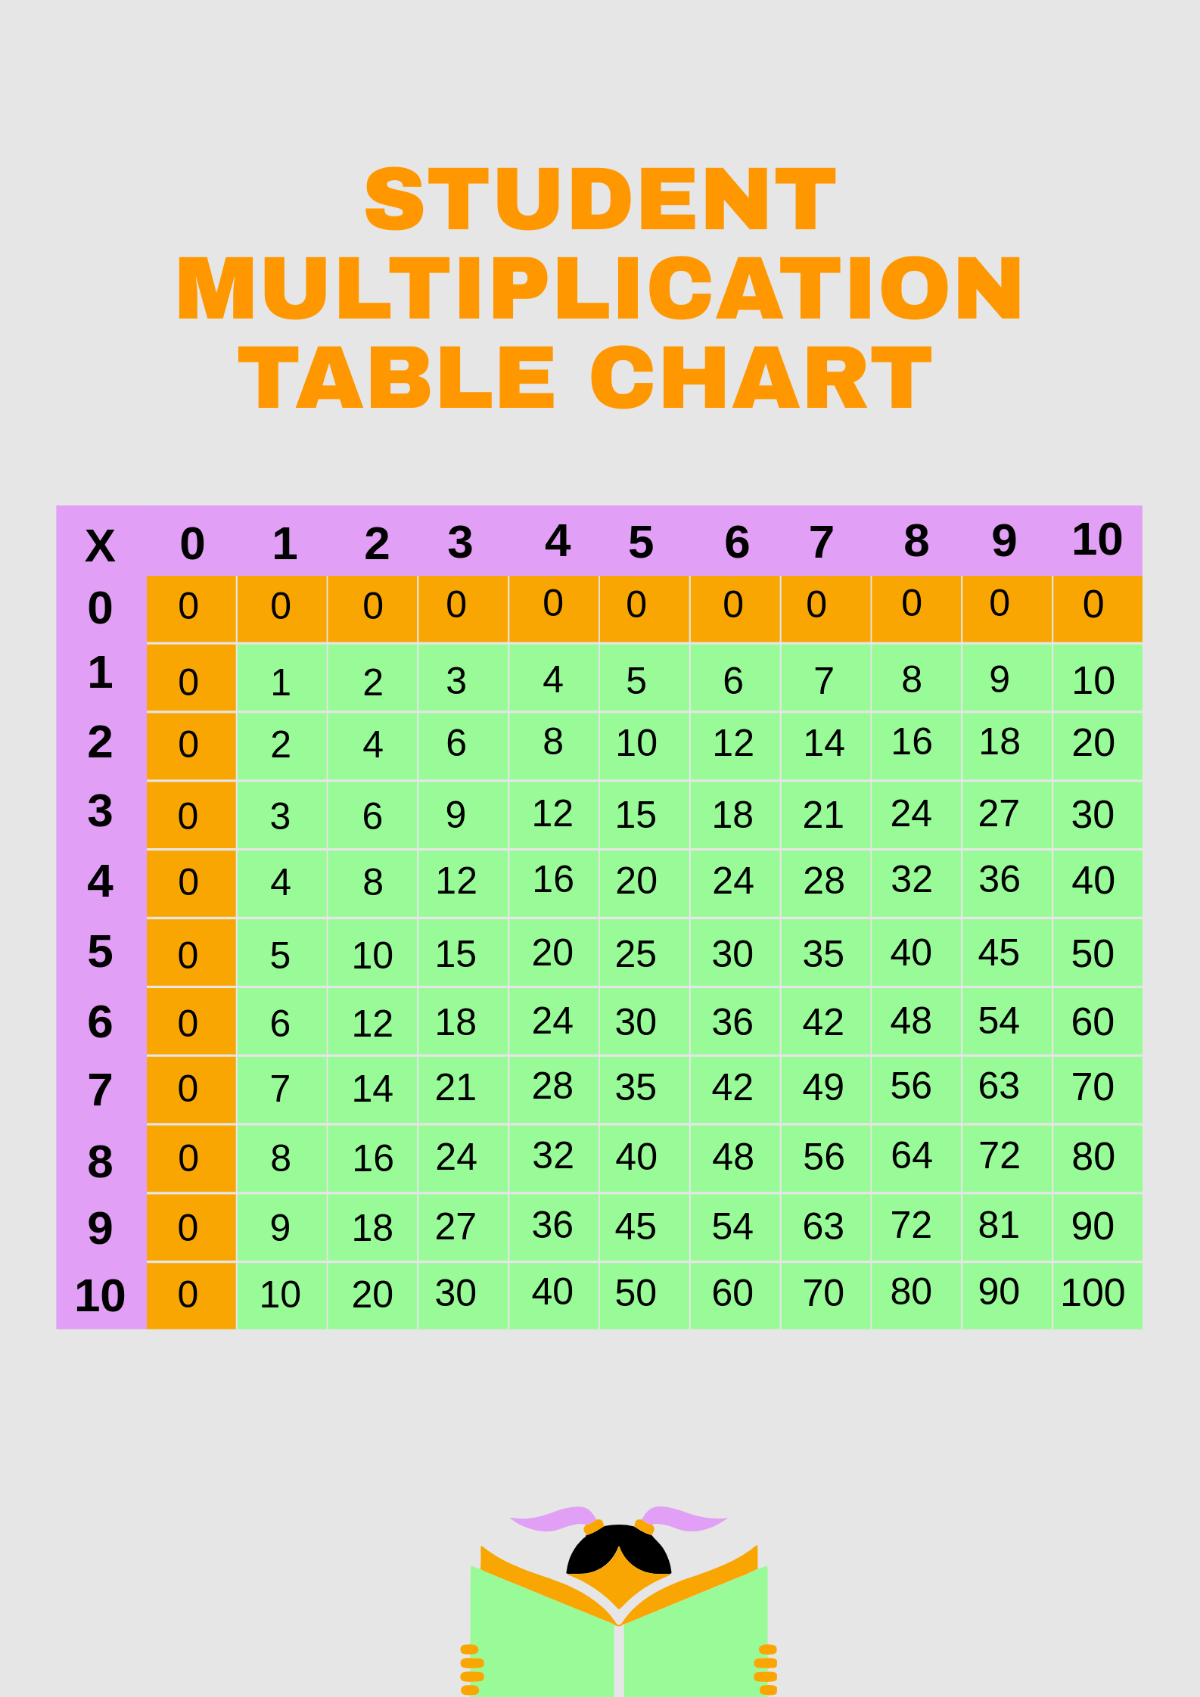 Multiplication Table Chart for Student Template